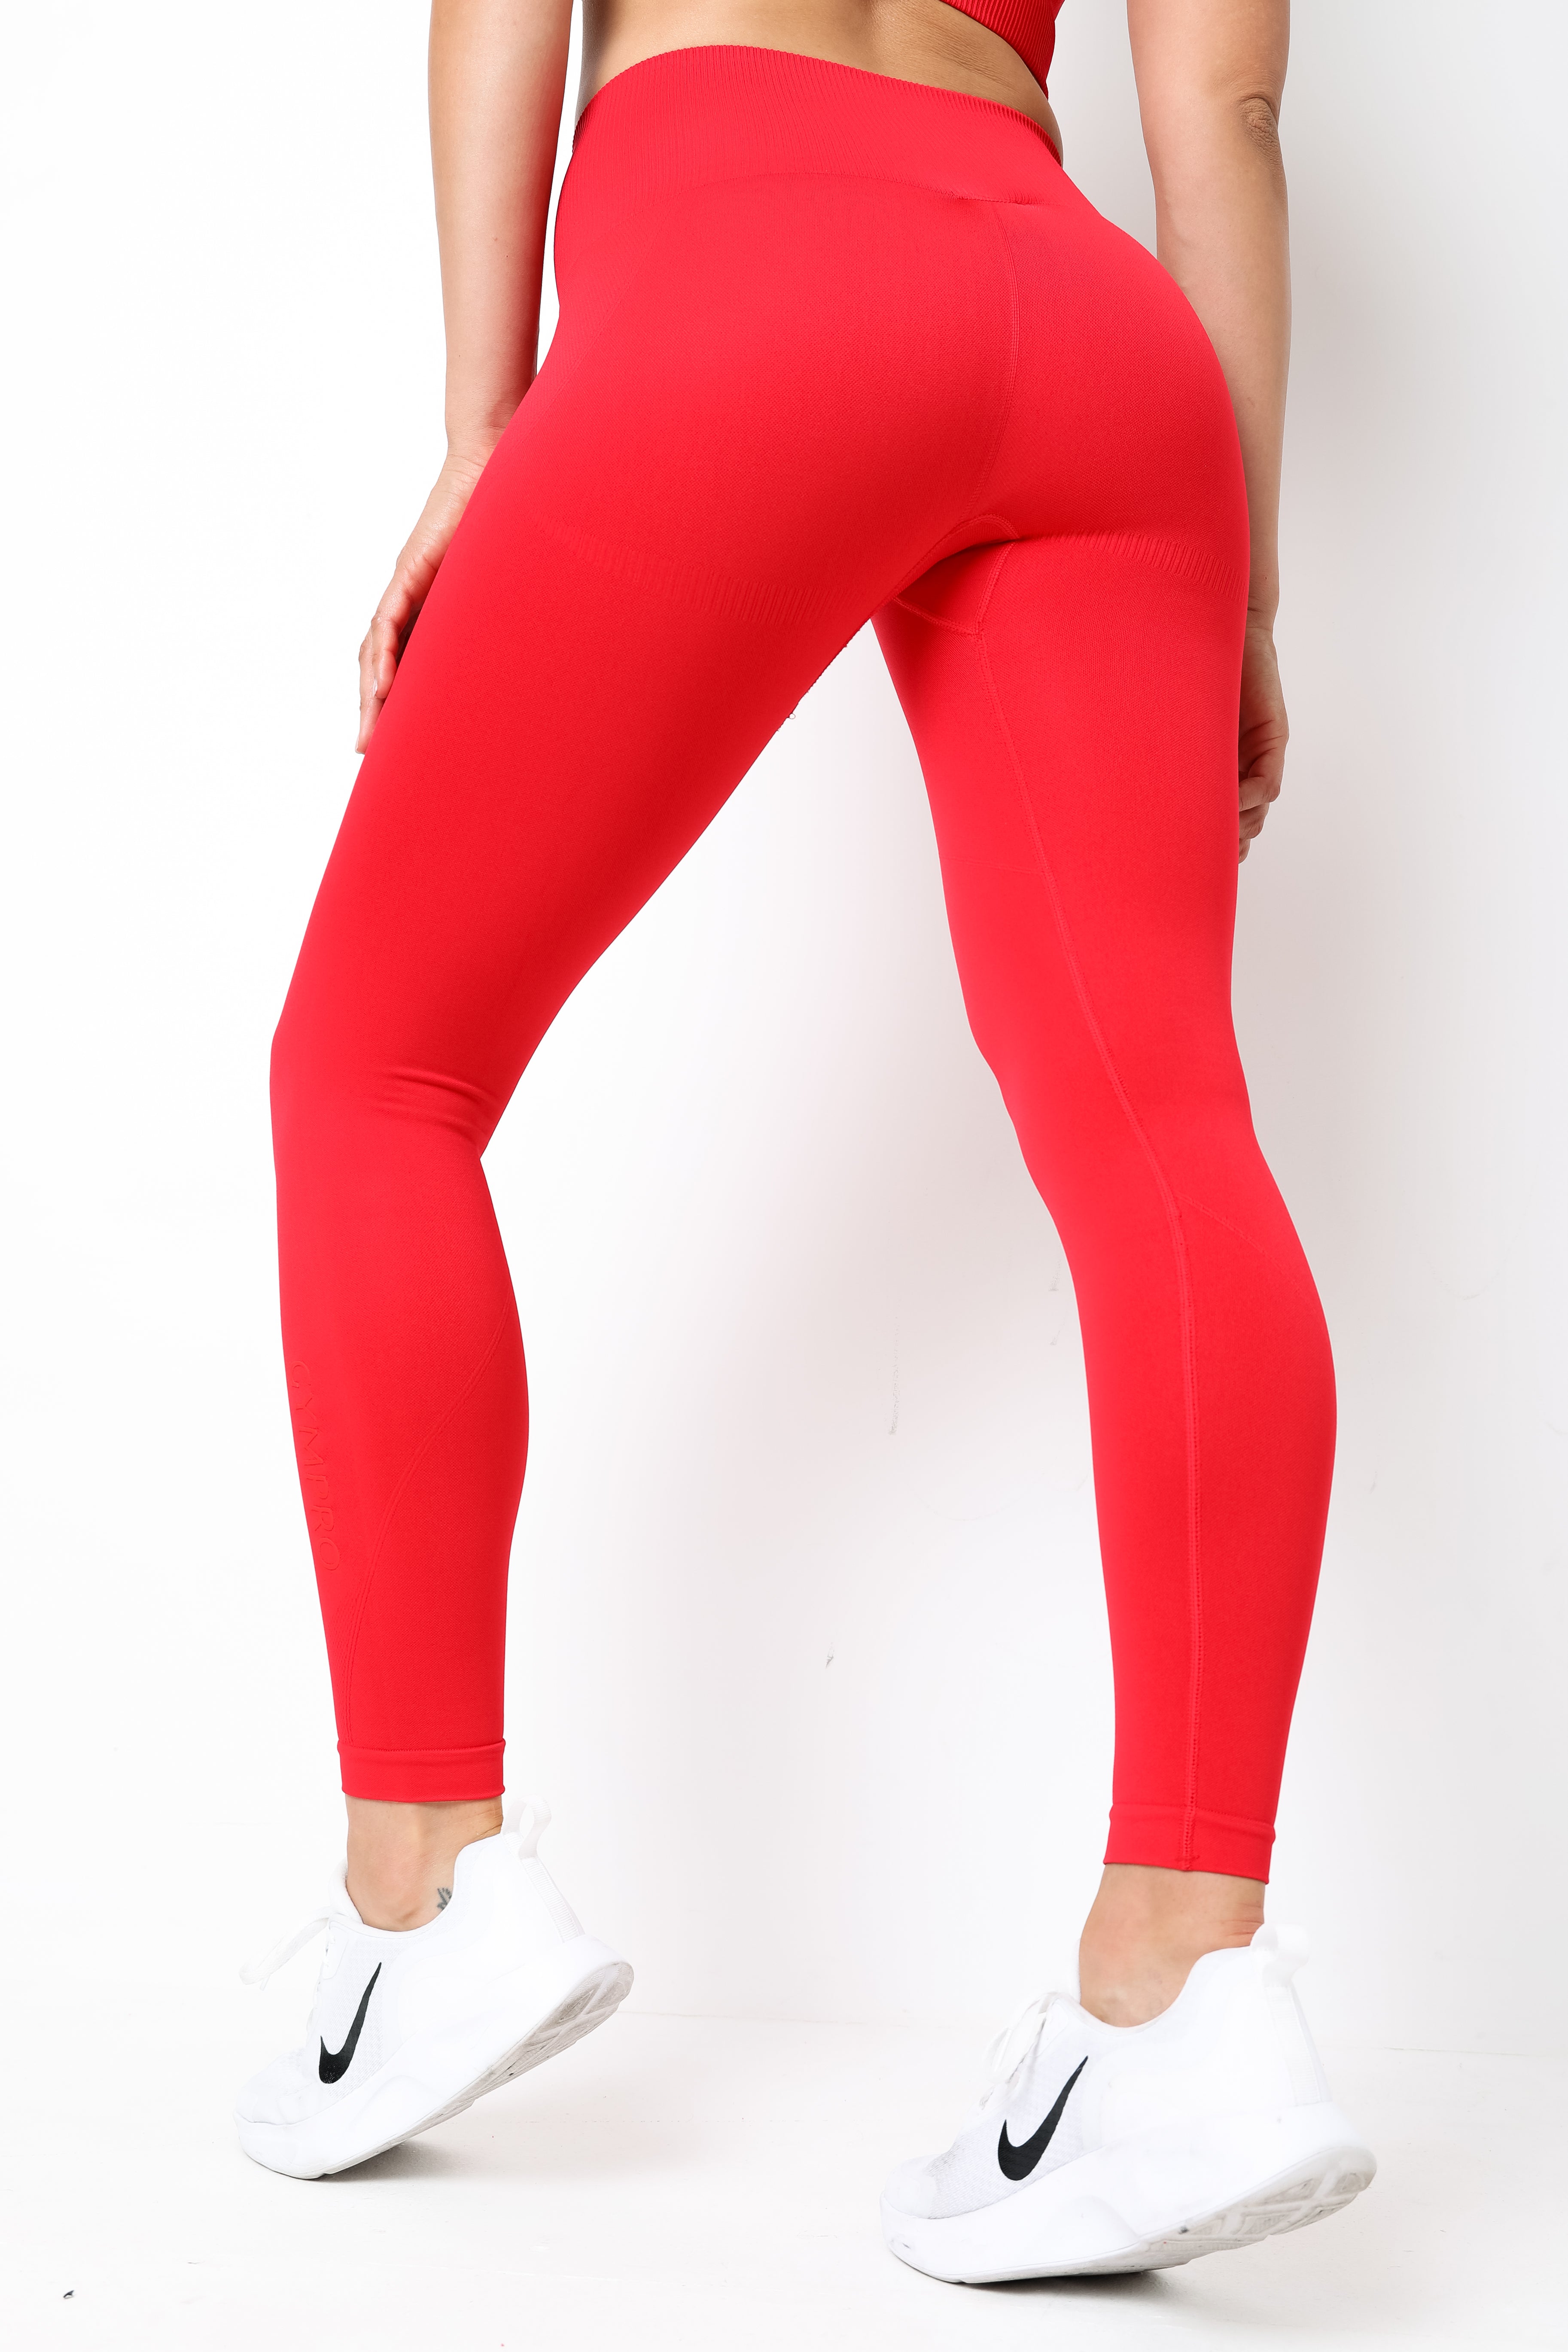 Hoxton Haus seamless gym leggings in red